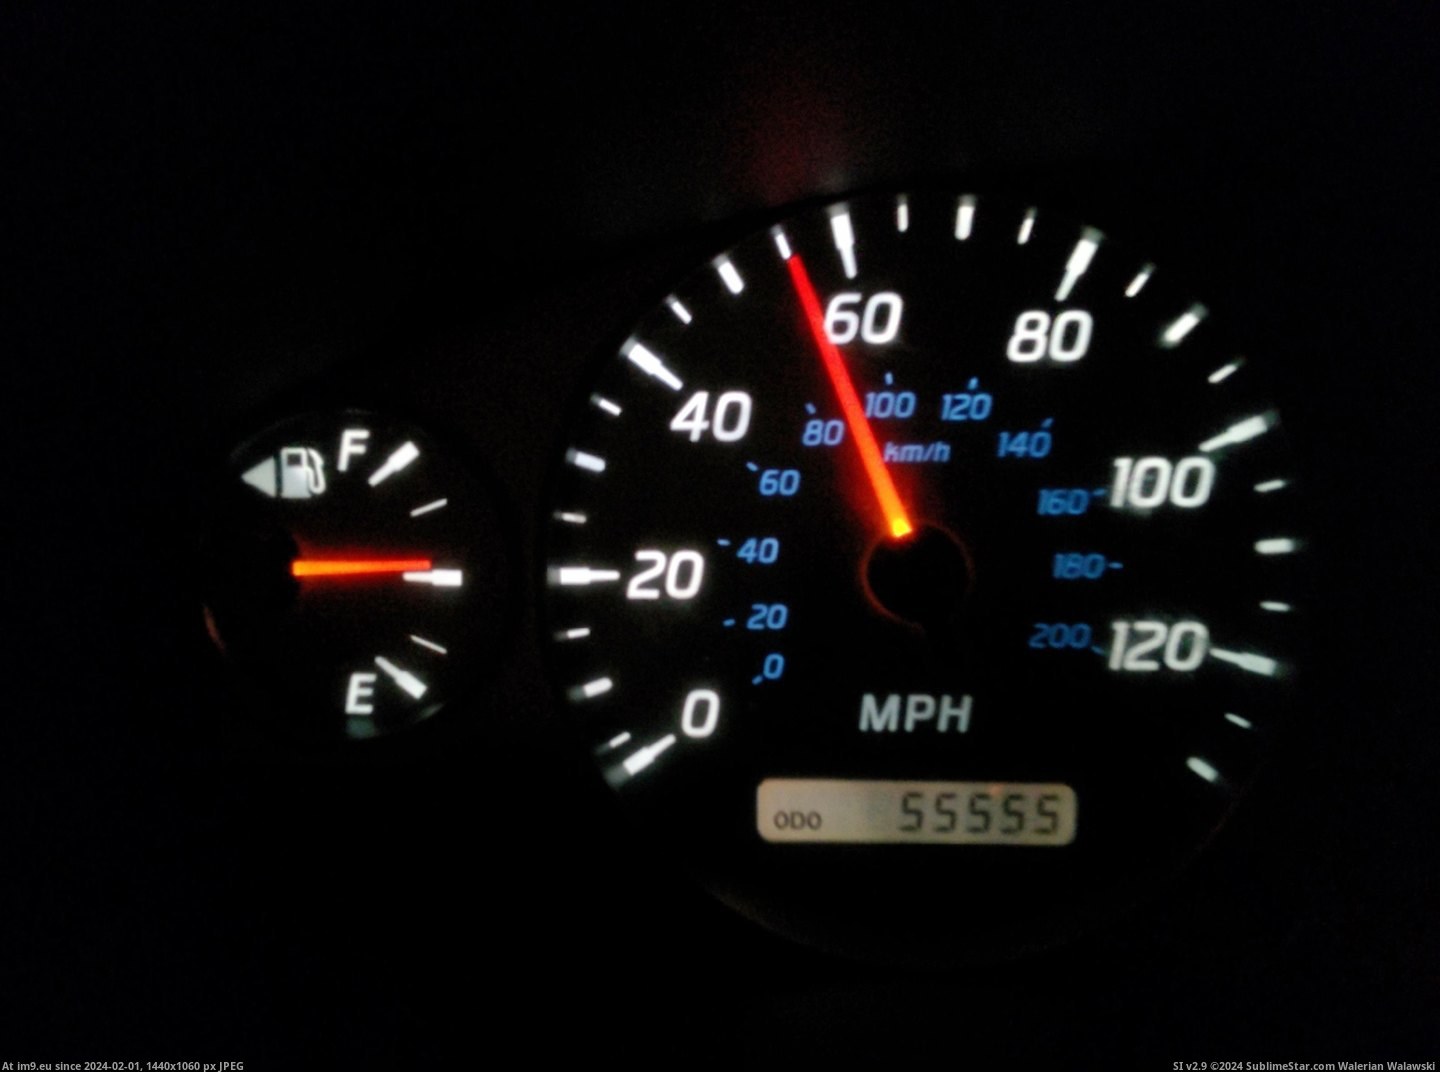 #Gas #Miles #Odometer #Tank #Mph [Mildlyinteresting] 55555 miles on my odometer, going 55 mph, with just under 55% of gas in my tank. Pic. (Изображение из альбом My r/MILDLYINTERESTING favs))